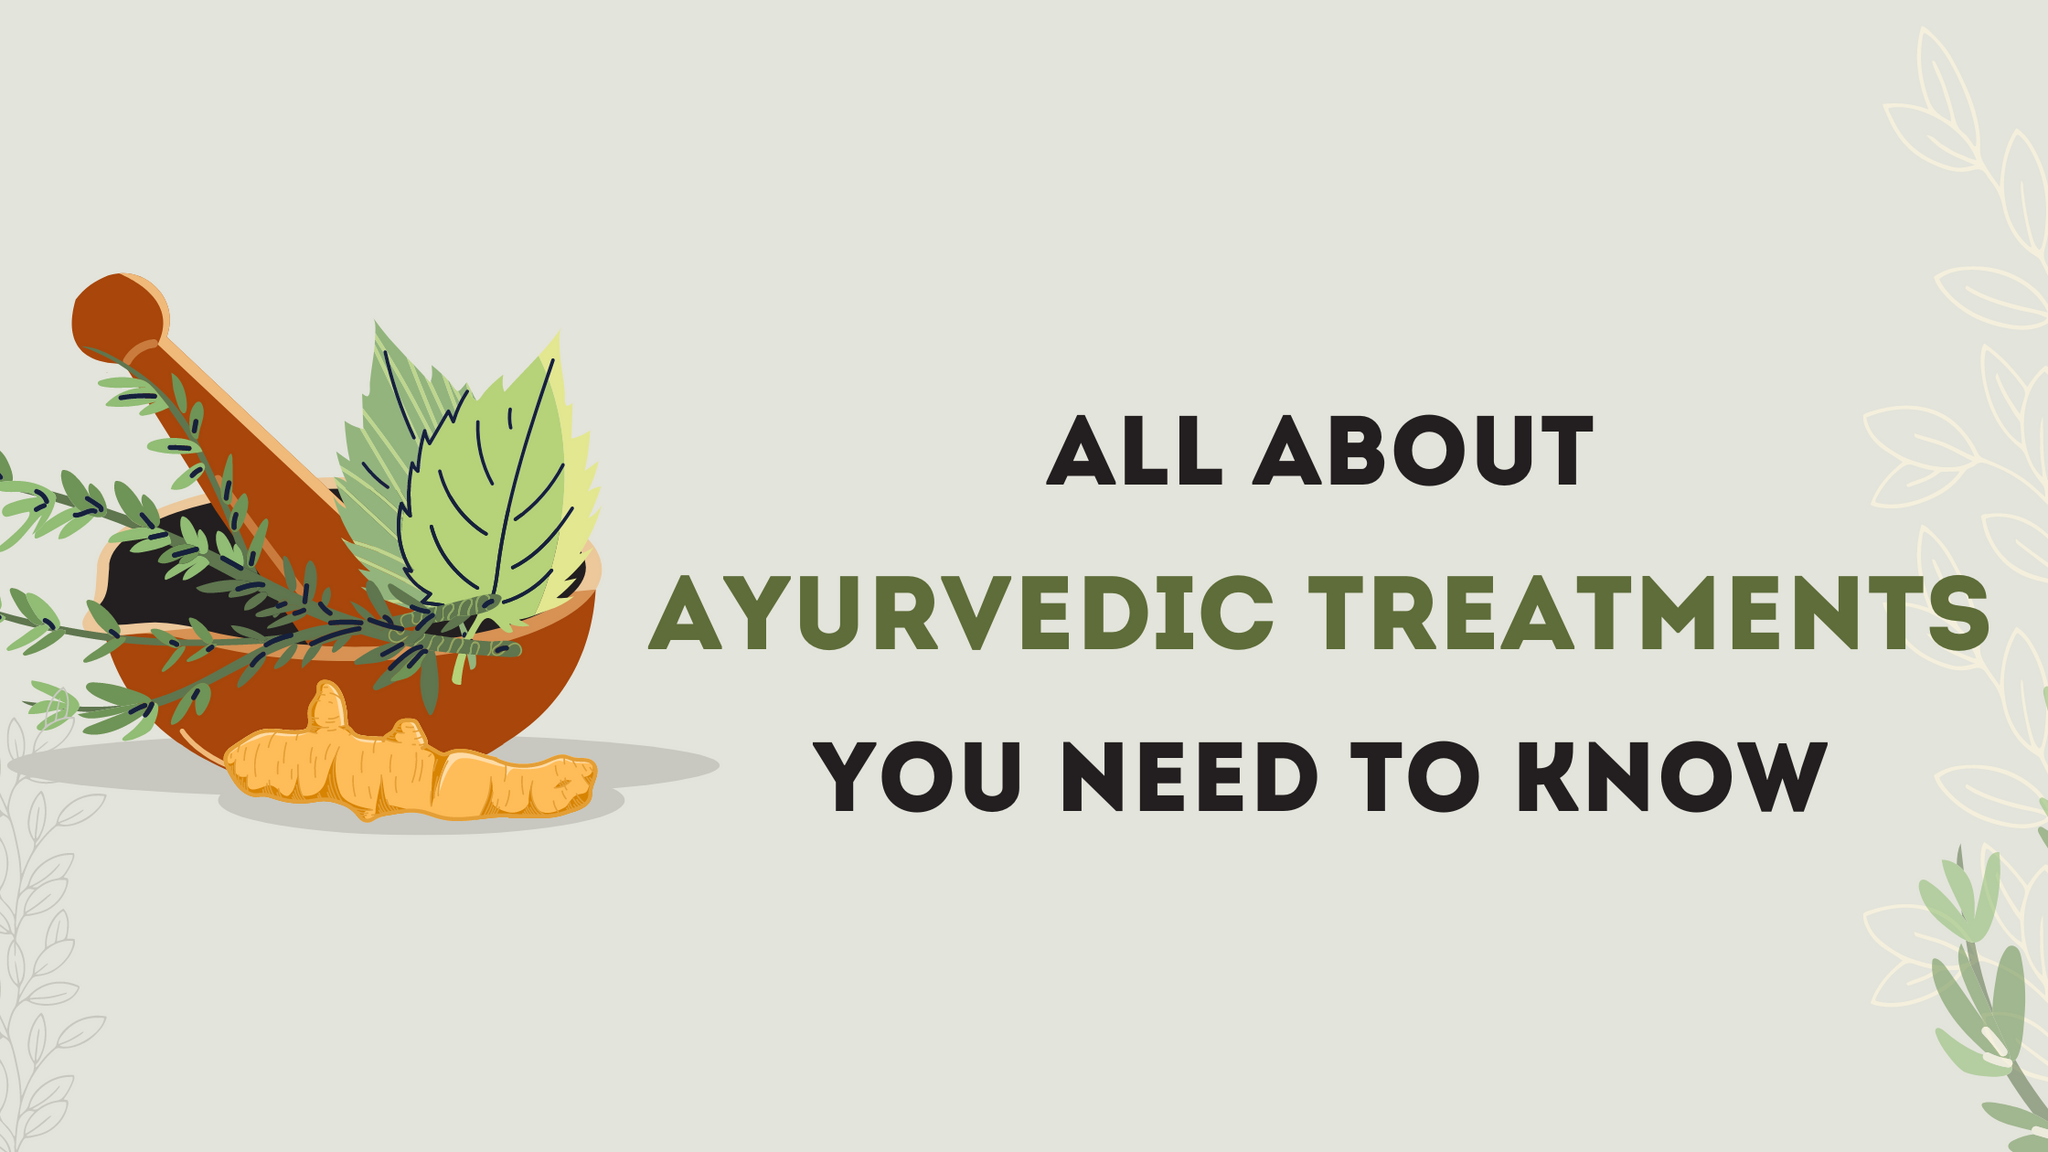 ALL ABOUT AYURVEDIC TREATMENTS YOU NEED TO KNOW